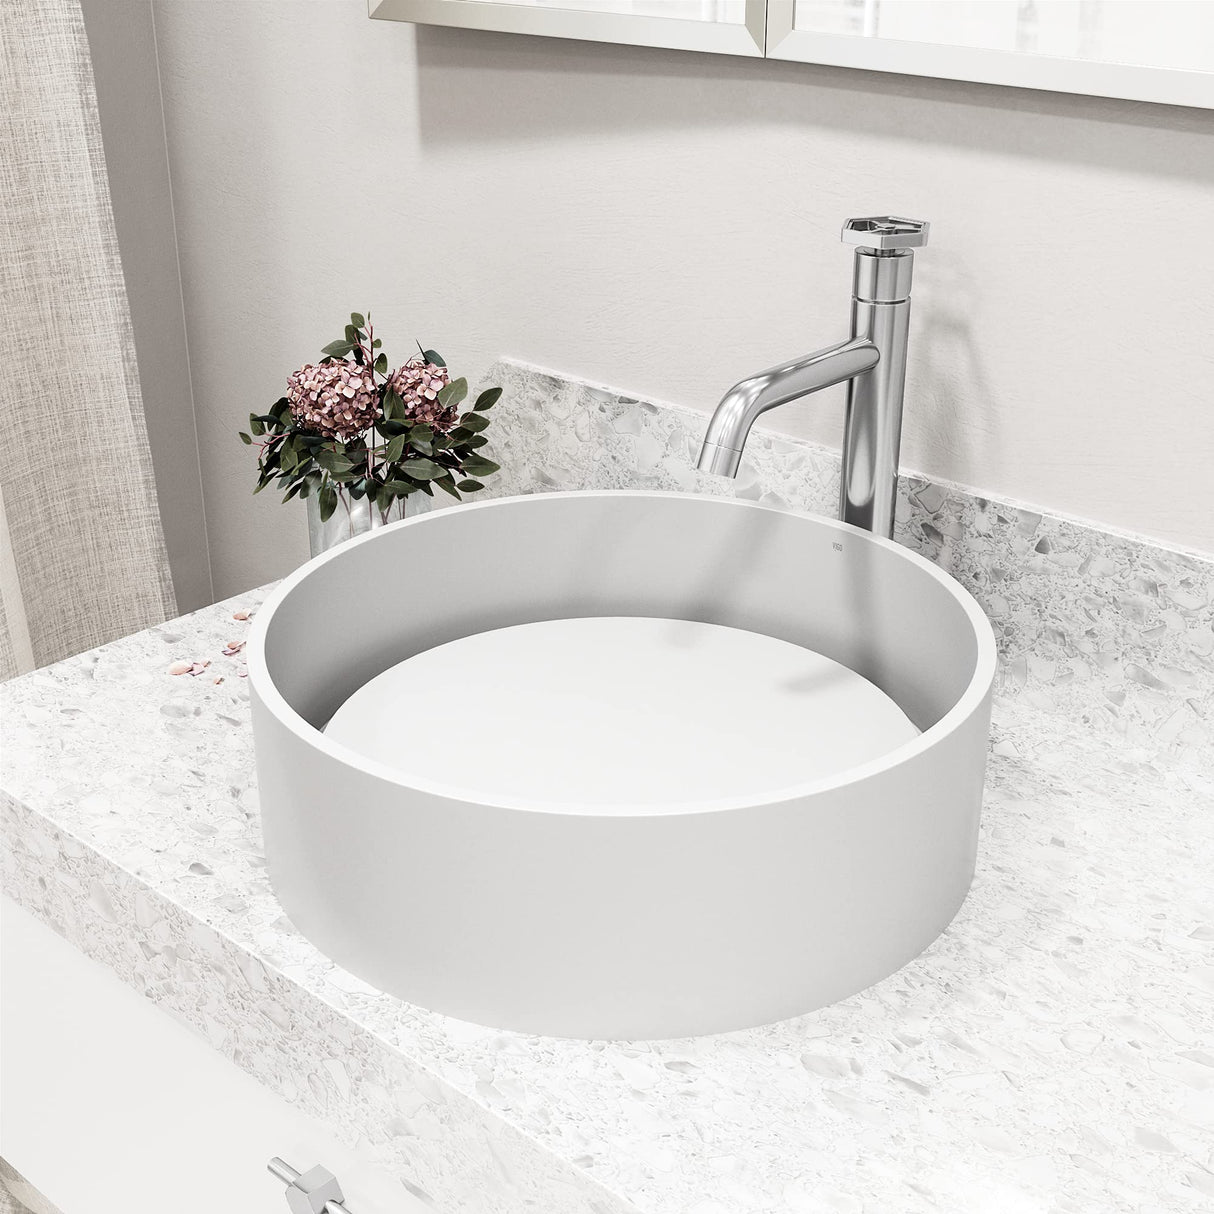 VIGO VGT2058 16.0" L -16.0" W -5.0" H Anvil Matte Stone Composite Round Vessel Bathroom Sink in White with Dior Faucet and Pop-Up Drain in Chrome